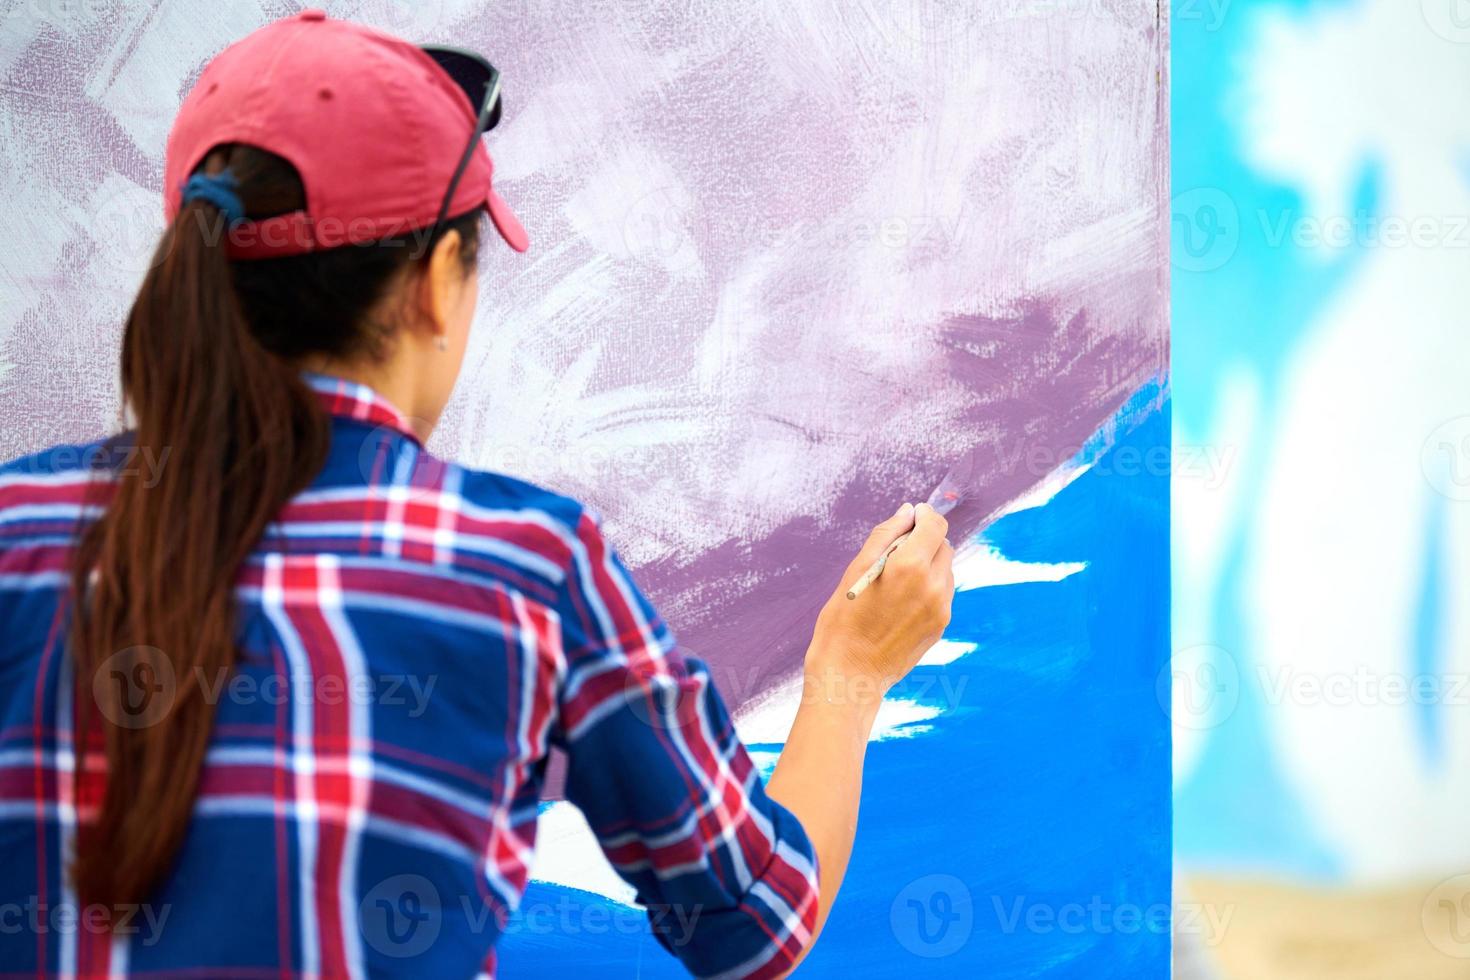 Female artist painting on wooden canvas board, painting abstract colorful picture, outdoor festival photo